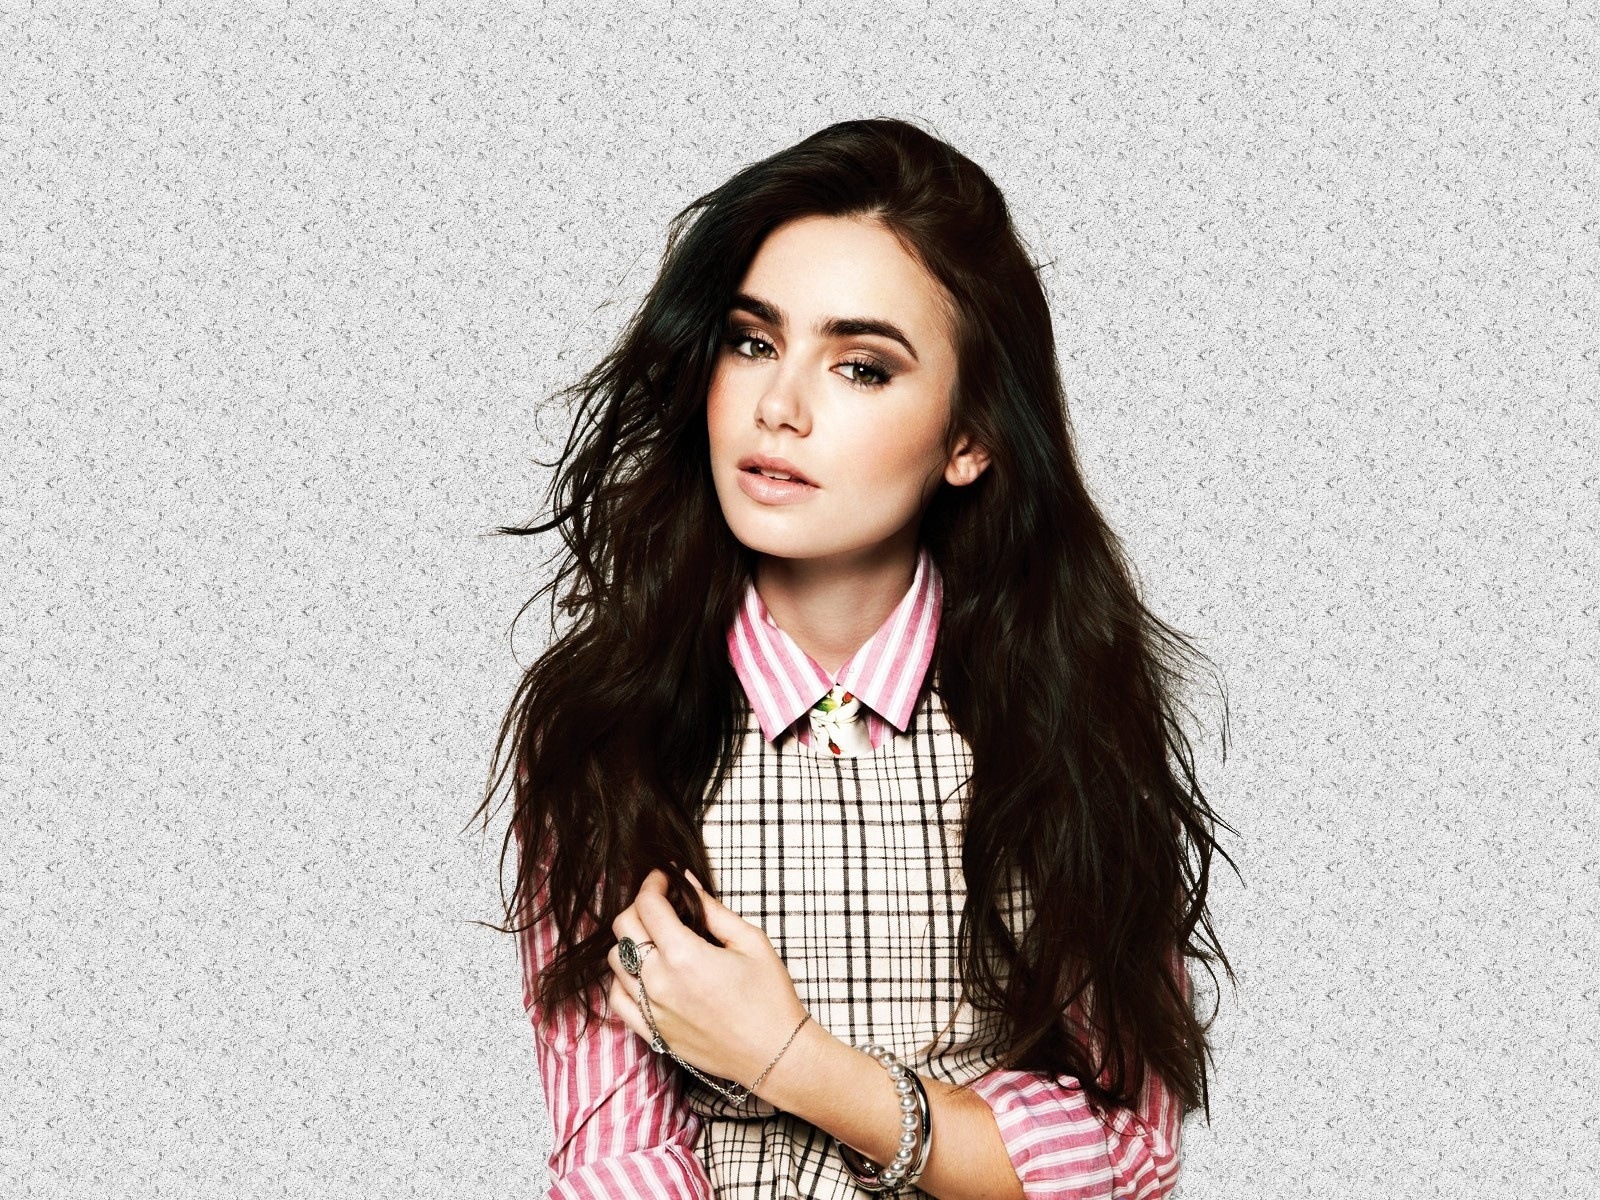 Lily Collins beautiful wallpapers #9 - 1600x1200